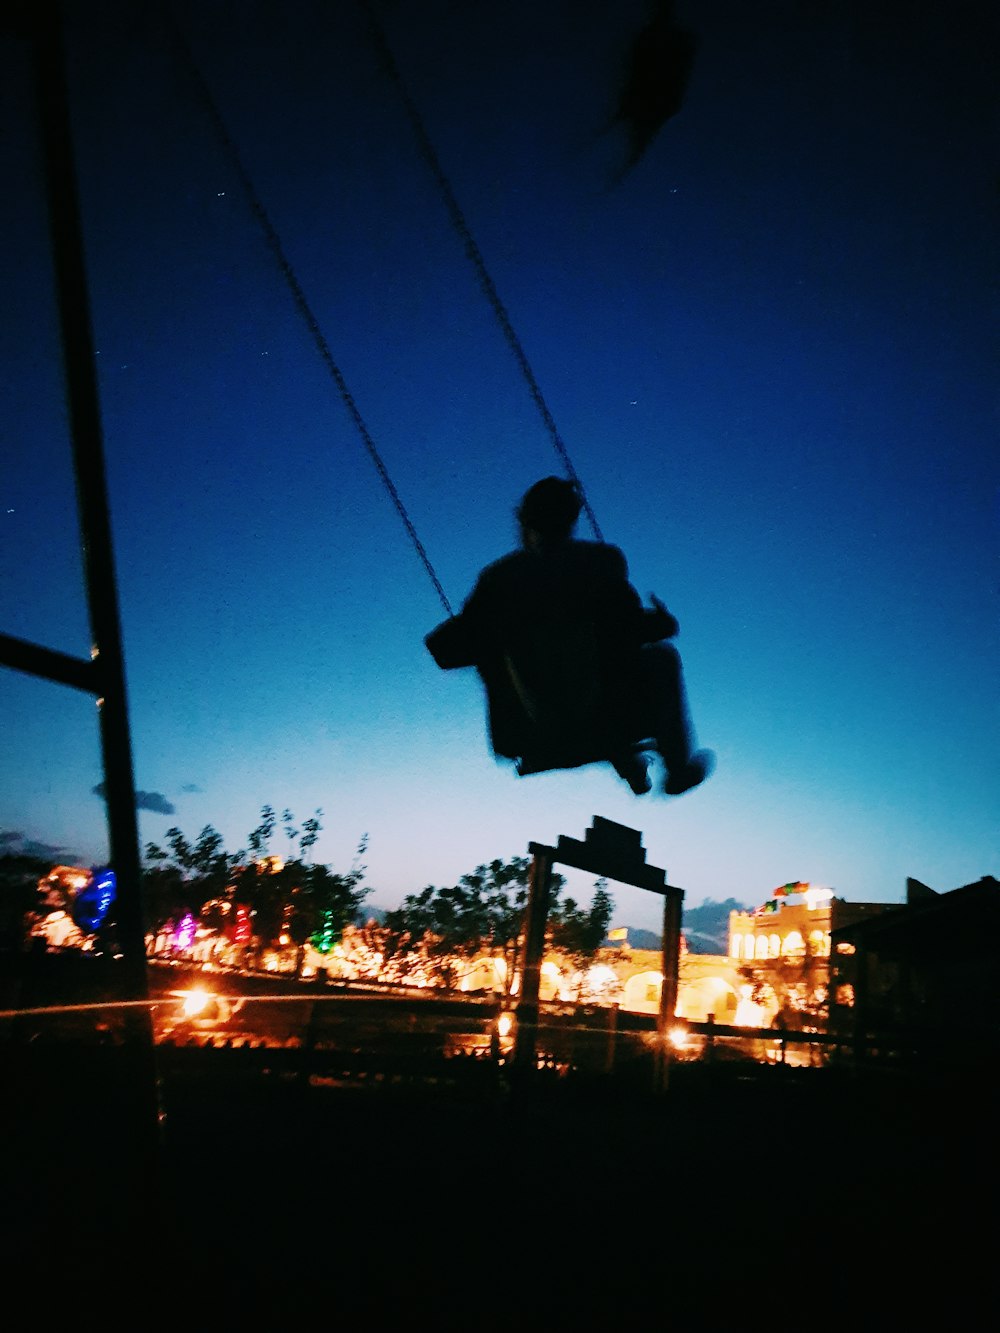 person riding on swing chair